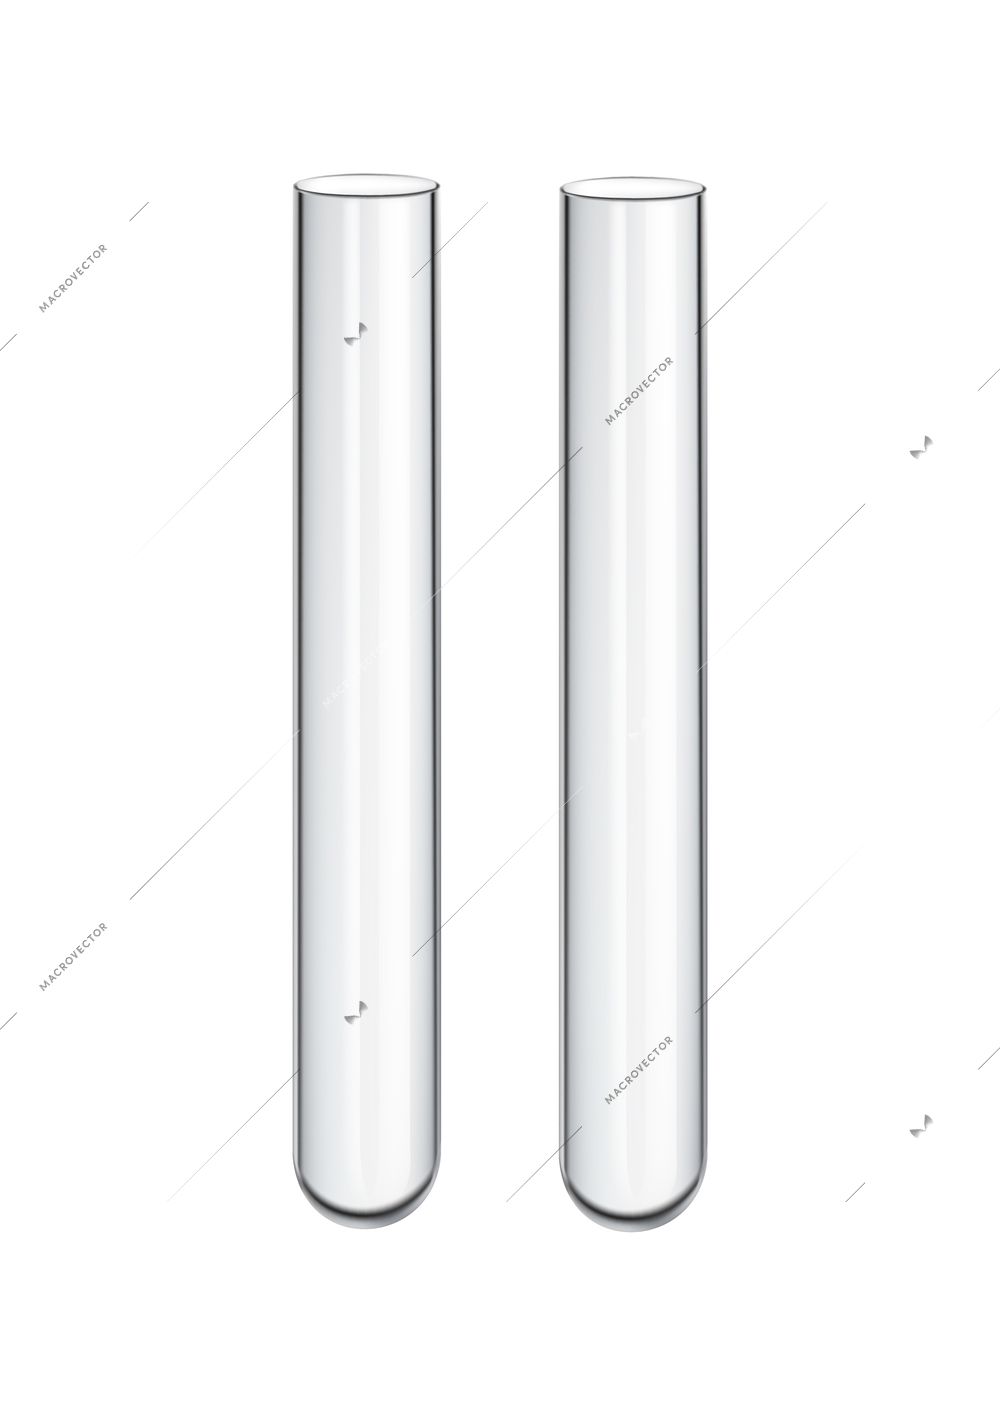 Two realistic empty glass laboratory tubes isolated vector illustration